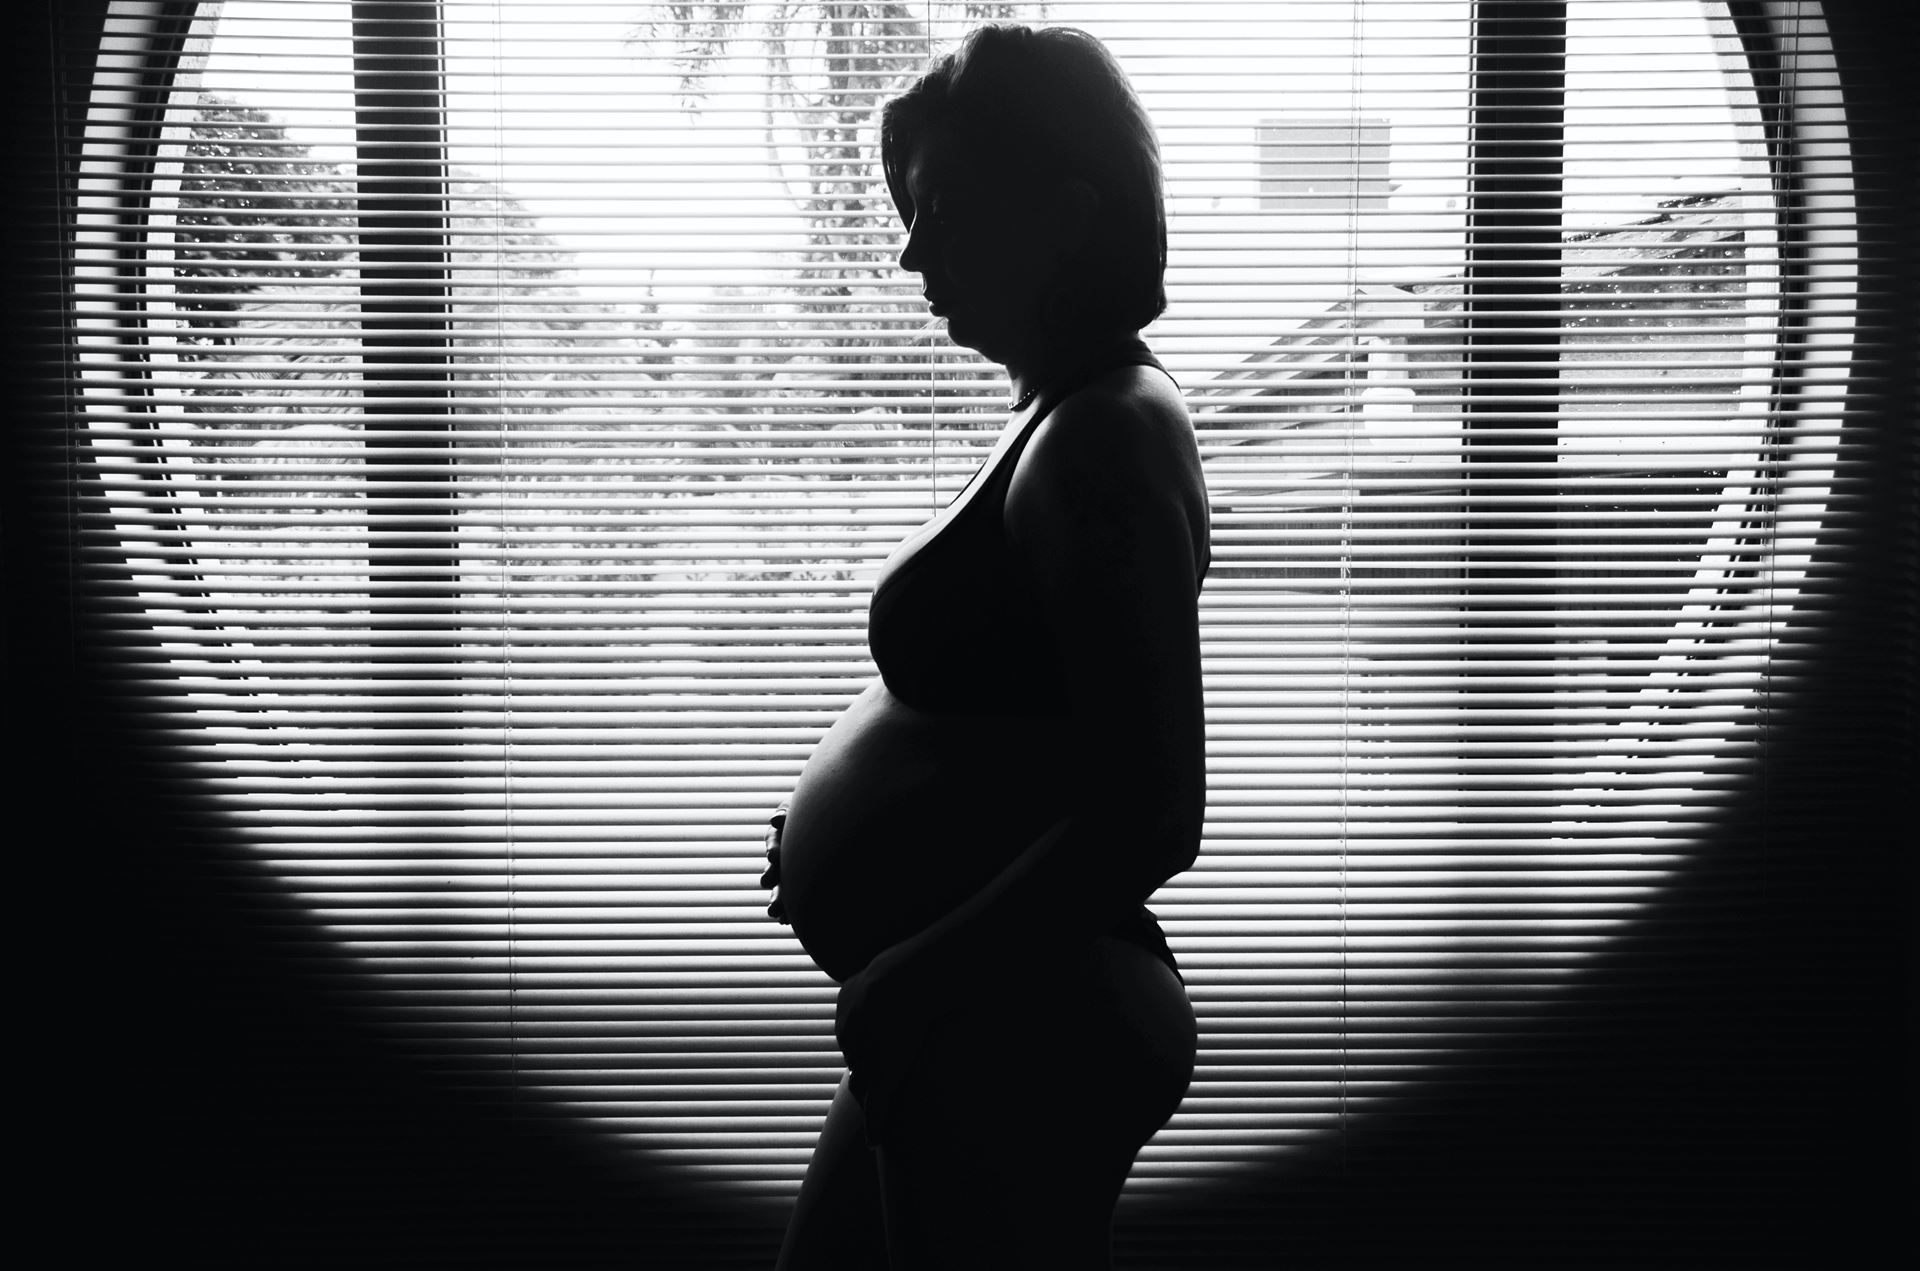 Black and white image of a pregnant individual's silhouette in front of a window with venetian blinds. Photo by Camila Cordeiro on Unsplash